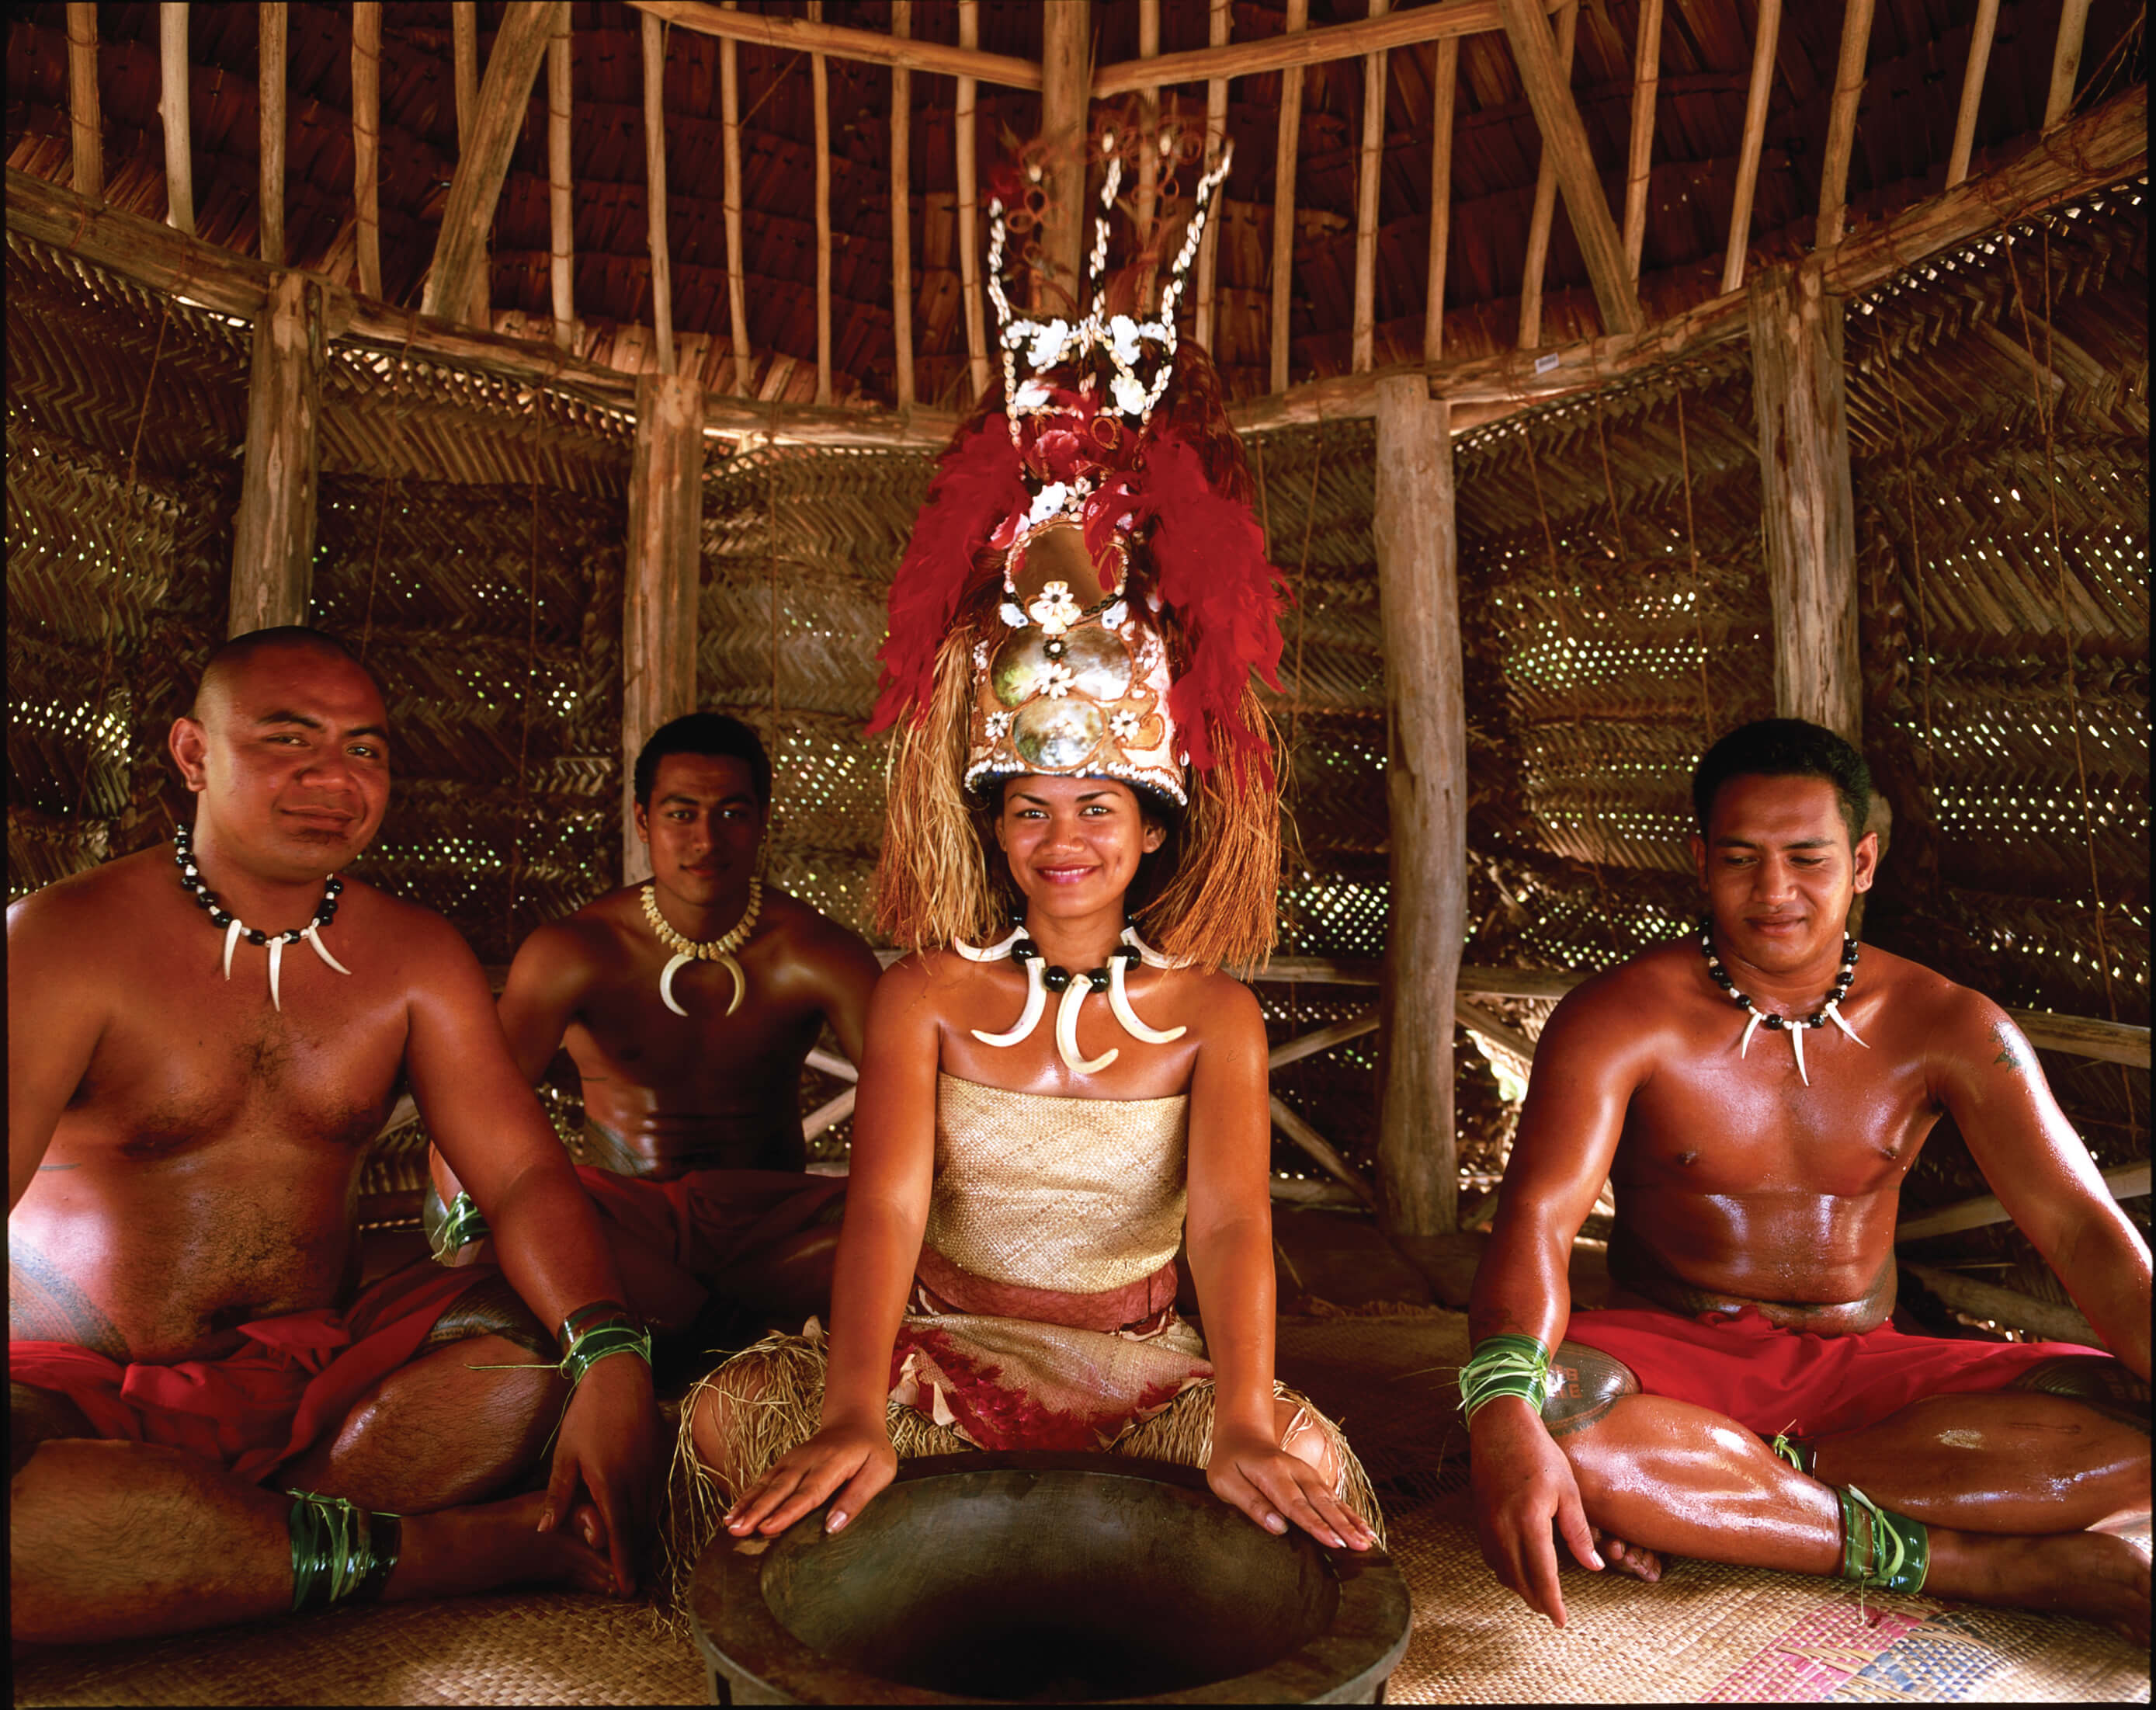 group of Samoans sitting in traditional outfits 